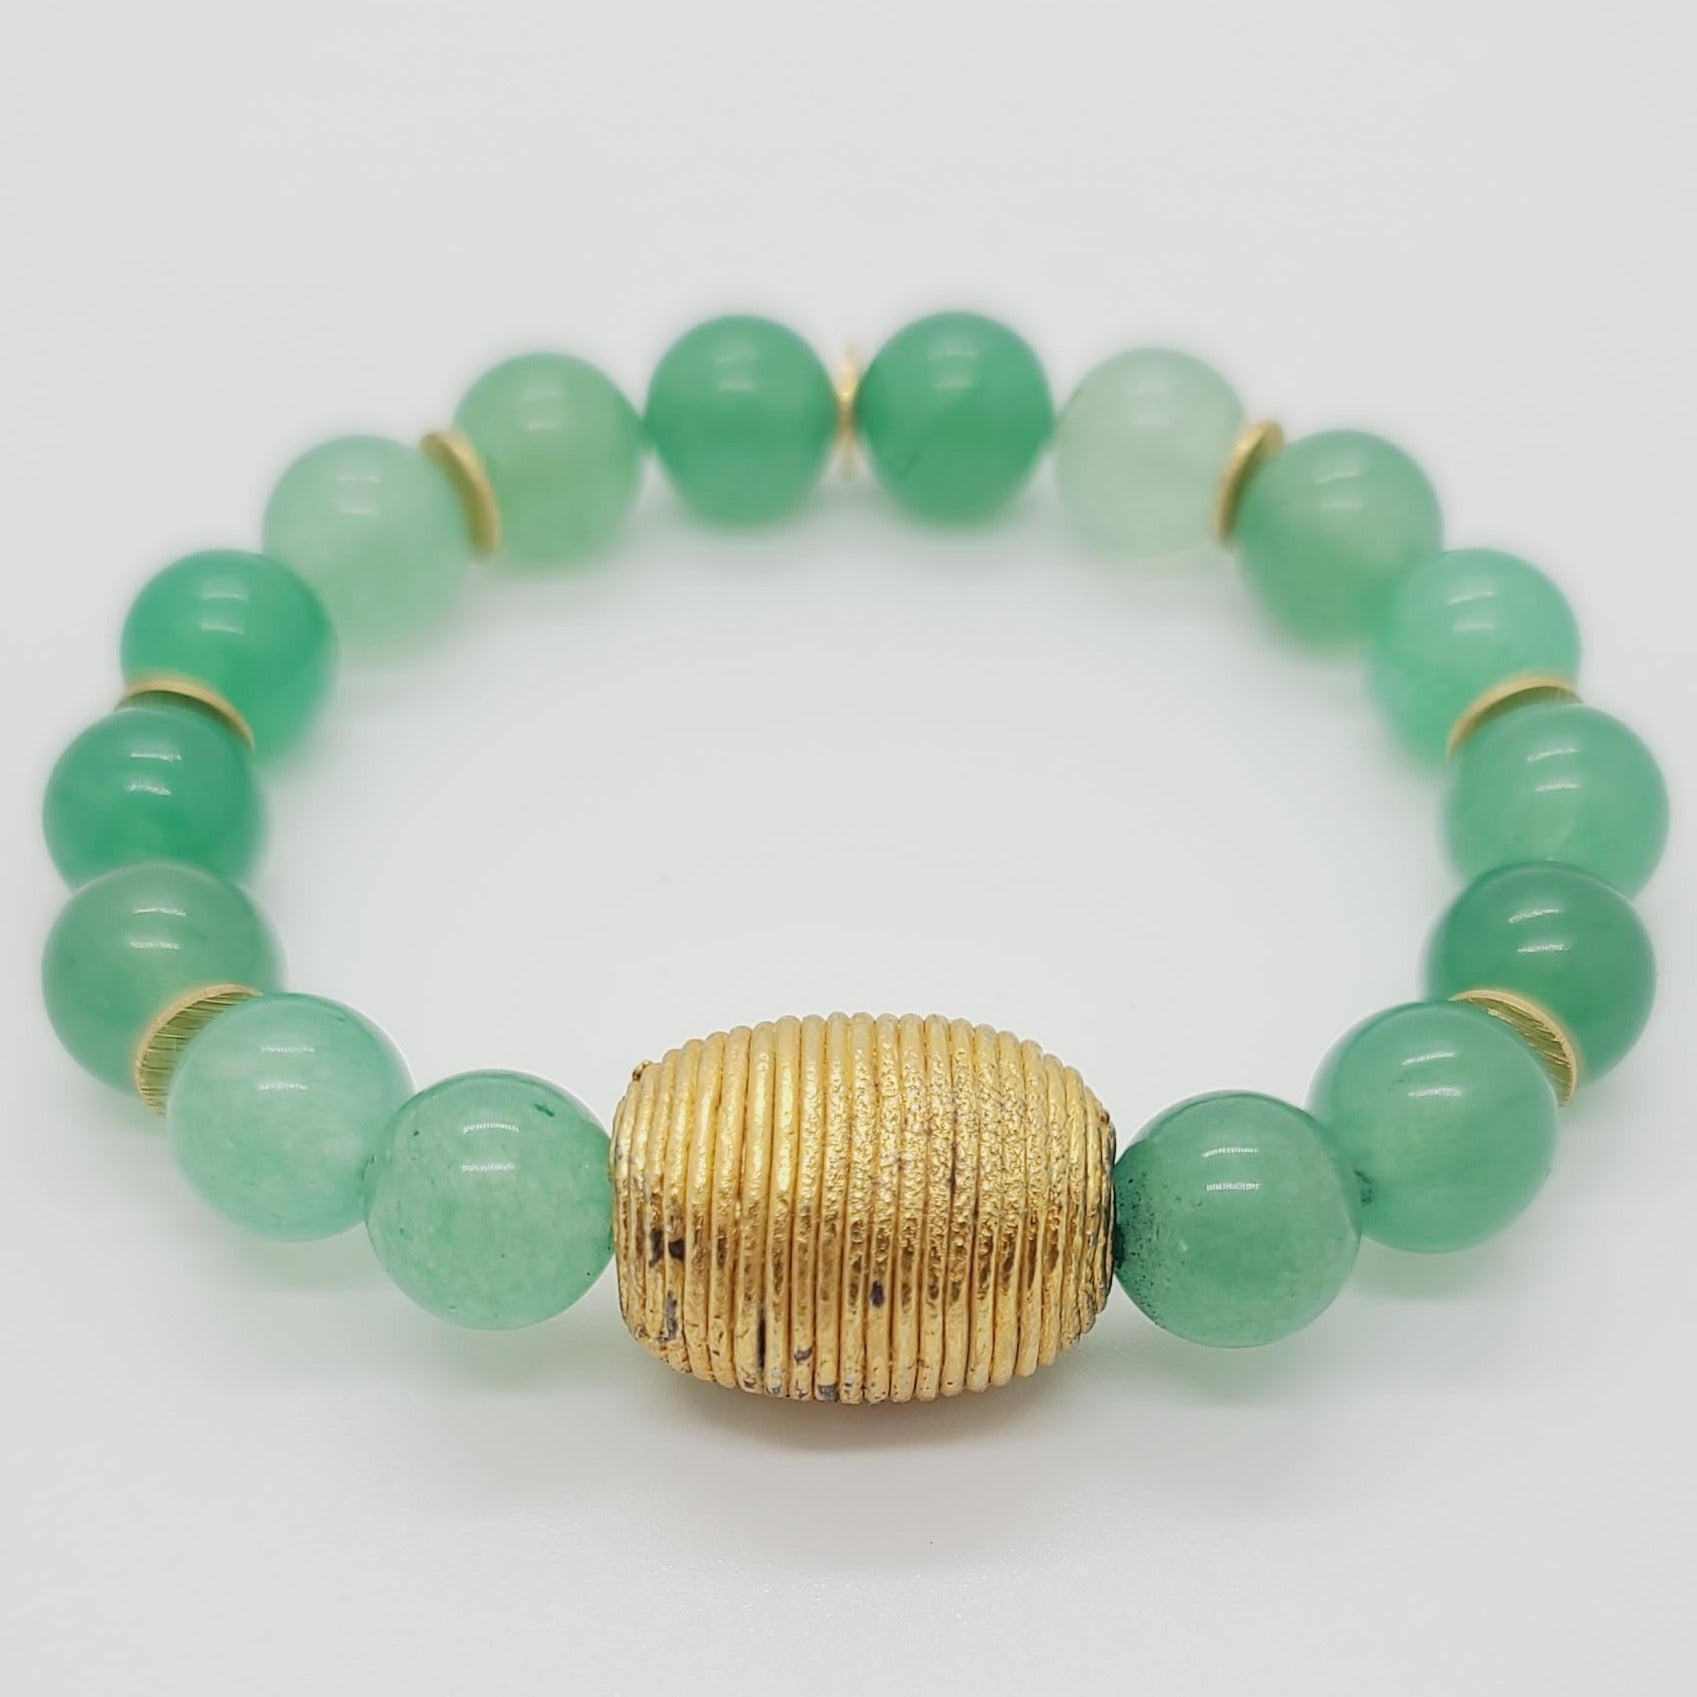 Length: 7.75 inches | Weight: 1.9 ounces  Distinctly You! This bracelet is made with 12mm seafoam green glass beads, with accents of gold spacers and Cameroon gold charm